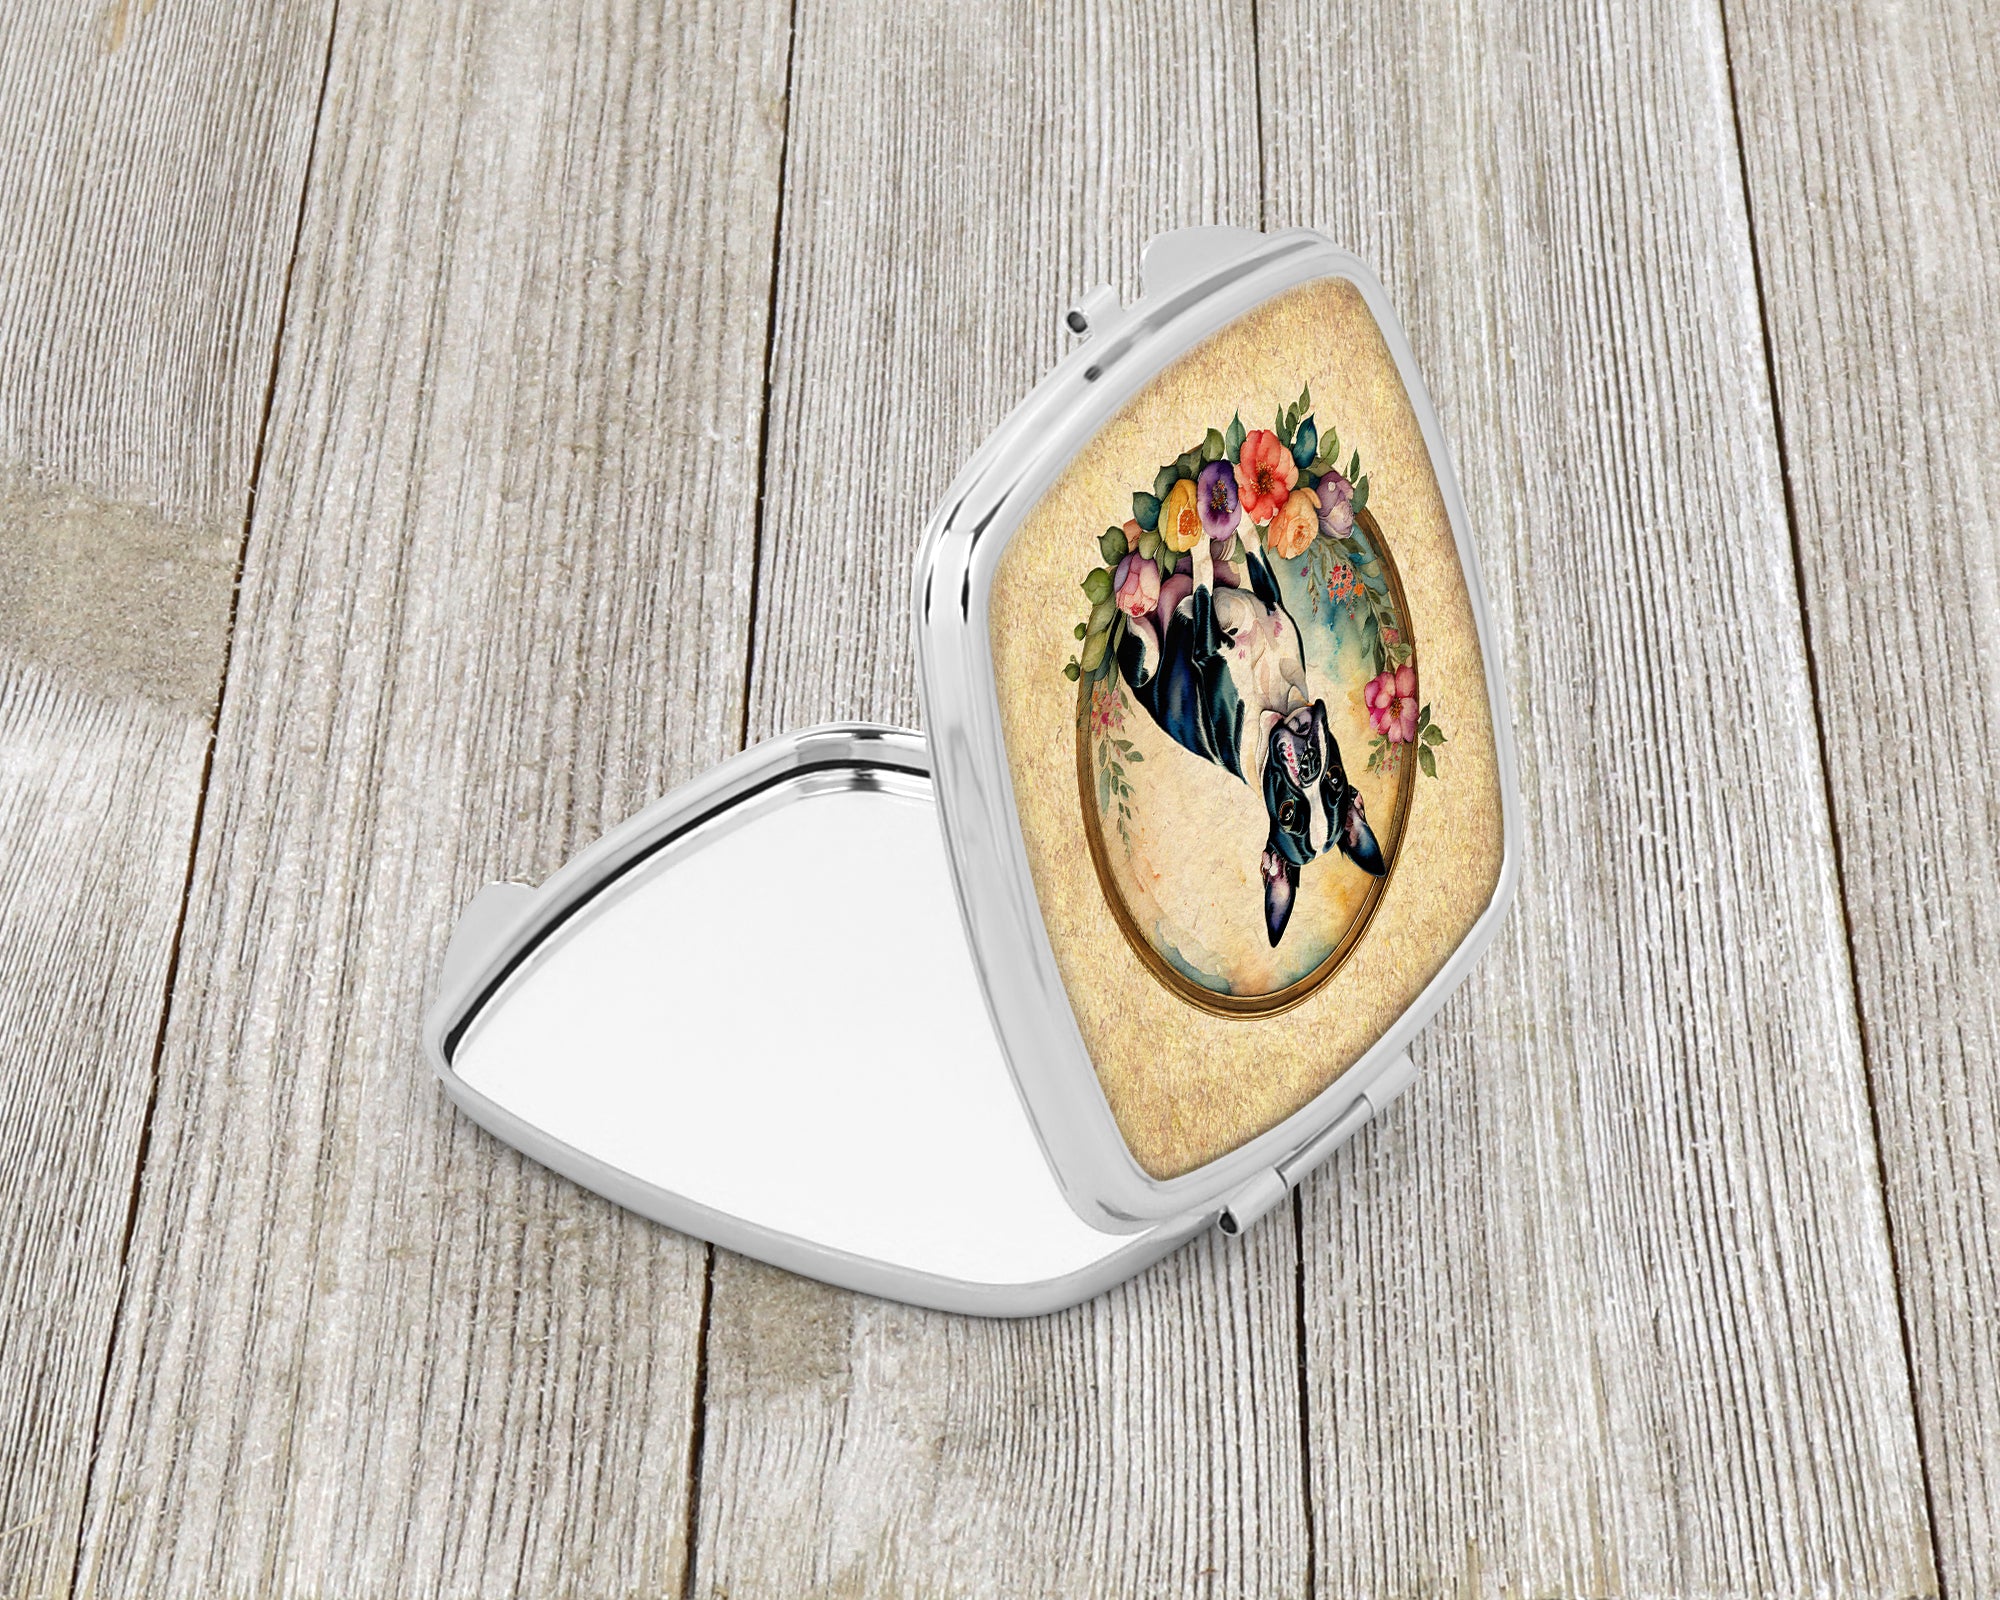 Boston Terrier and Flowers Compact Mirror